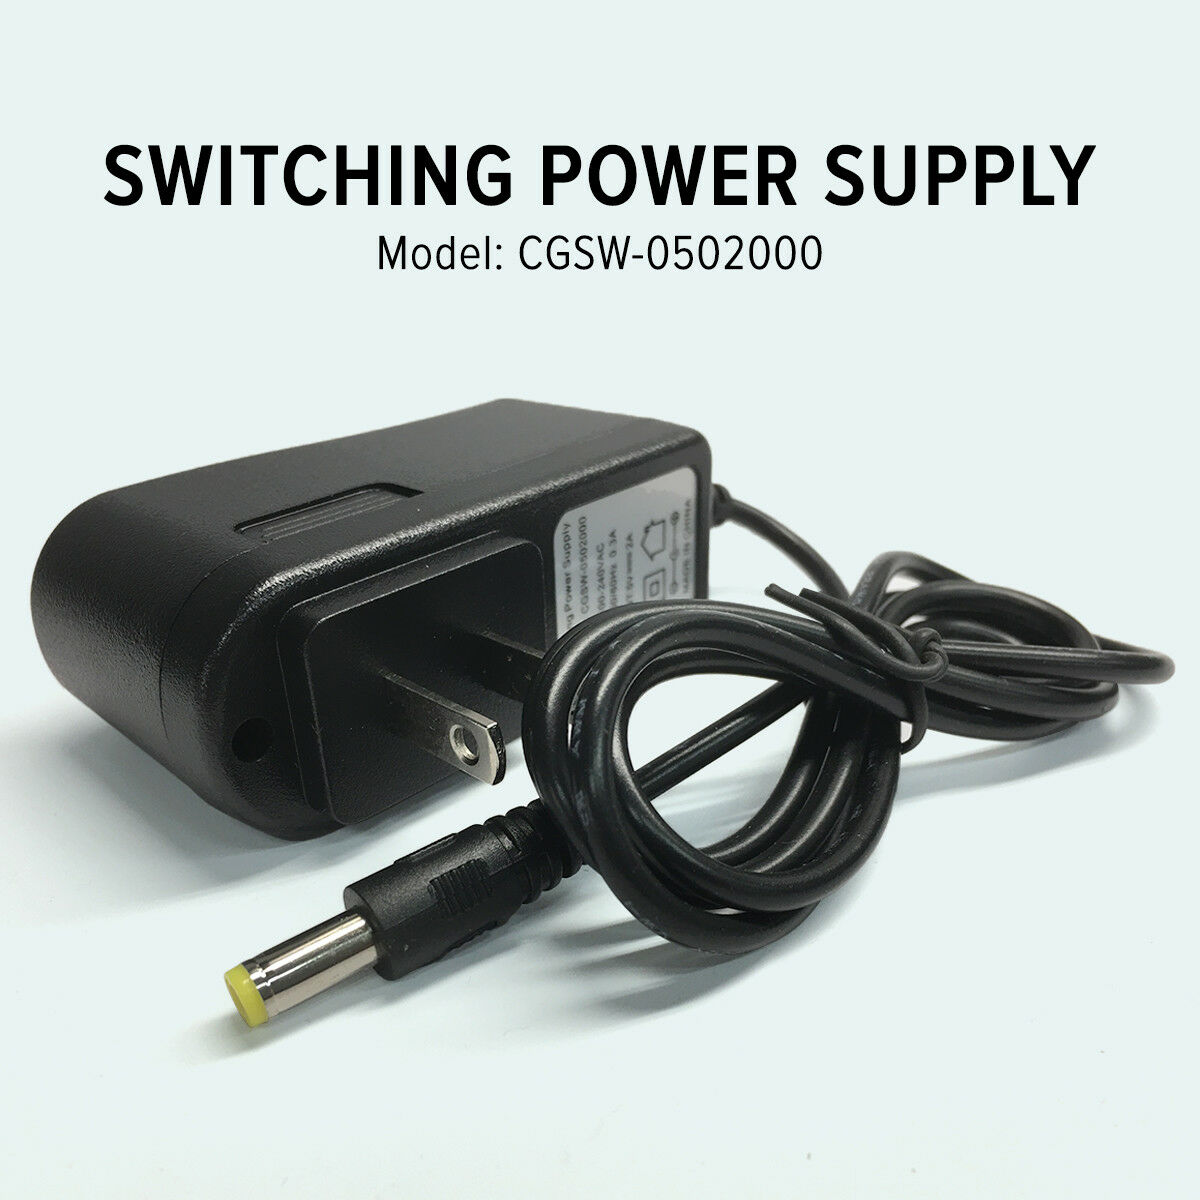 *Brand NEW*AC DC 5V 2A Adapter CGSW-0502000 Switching for Stream MX Box POWER SUPPLY